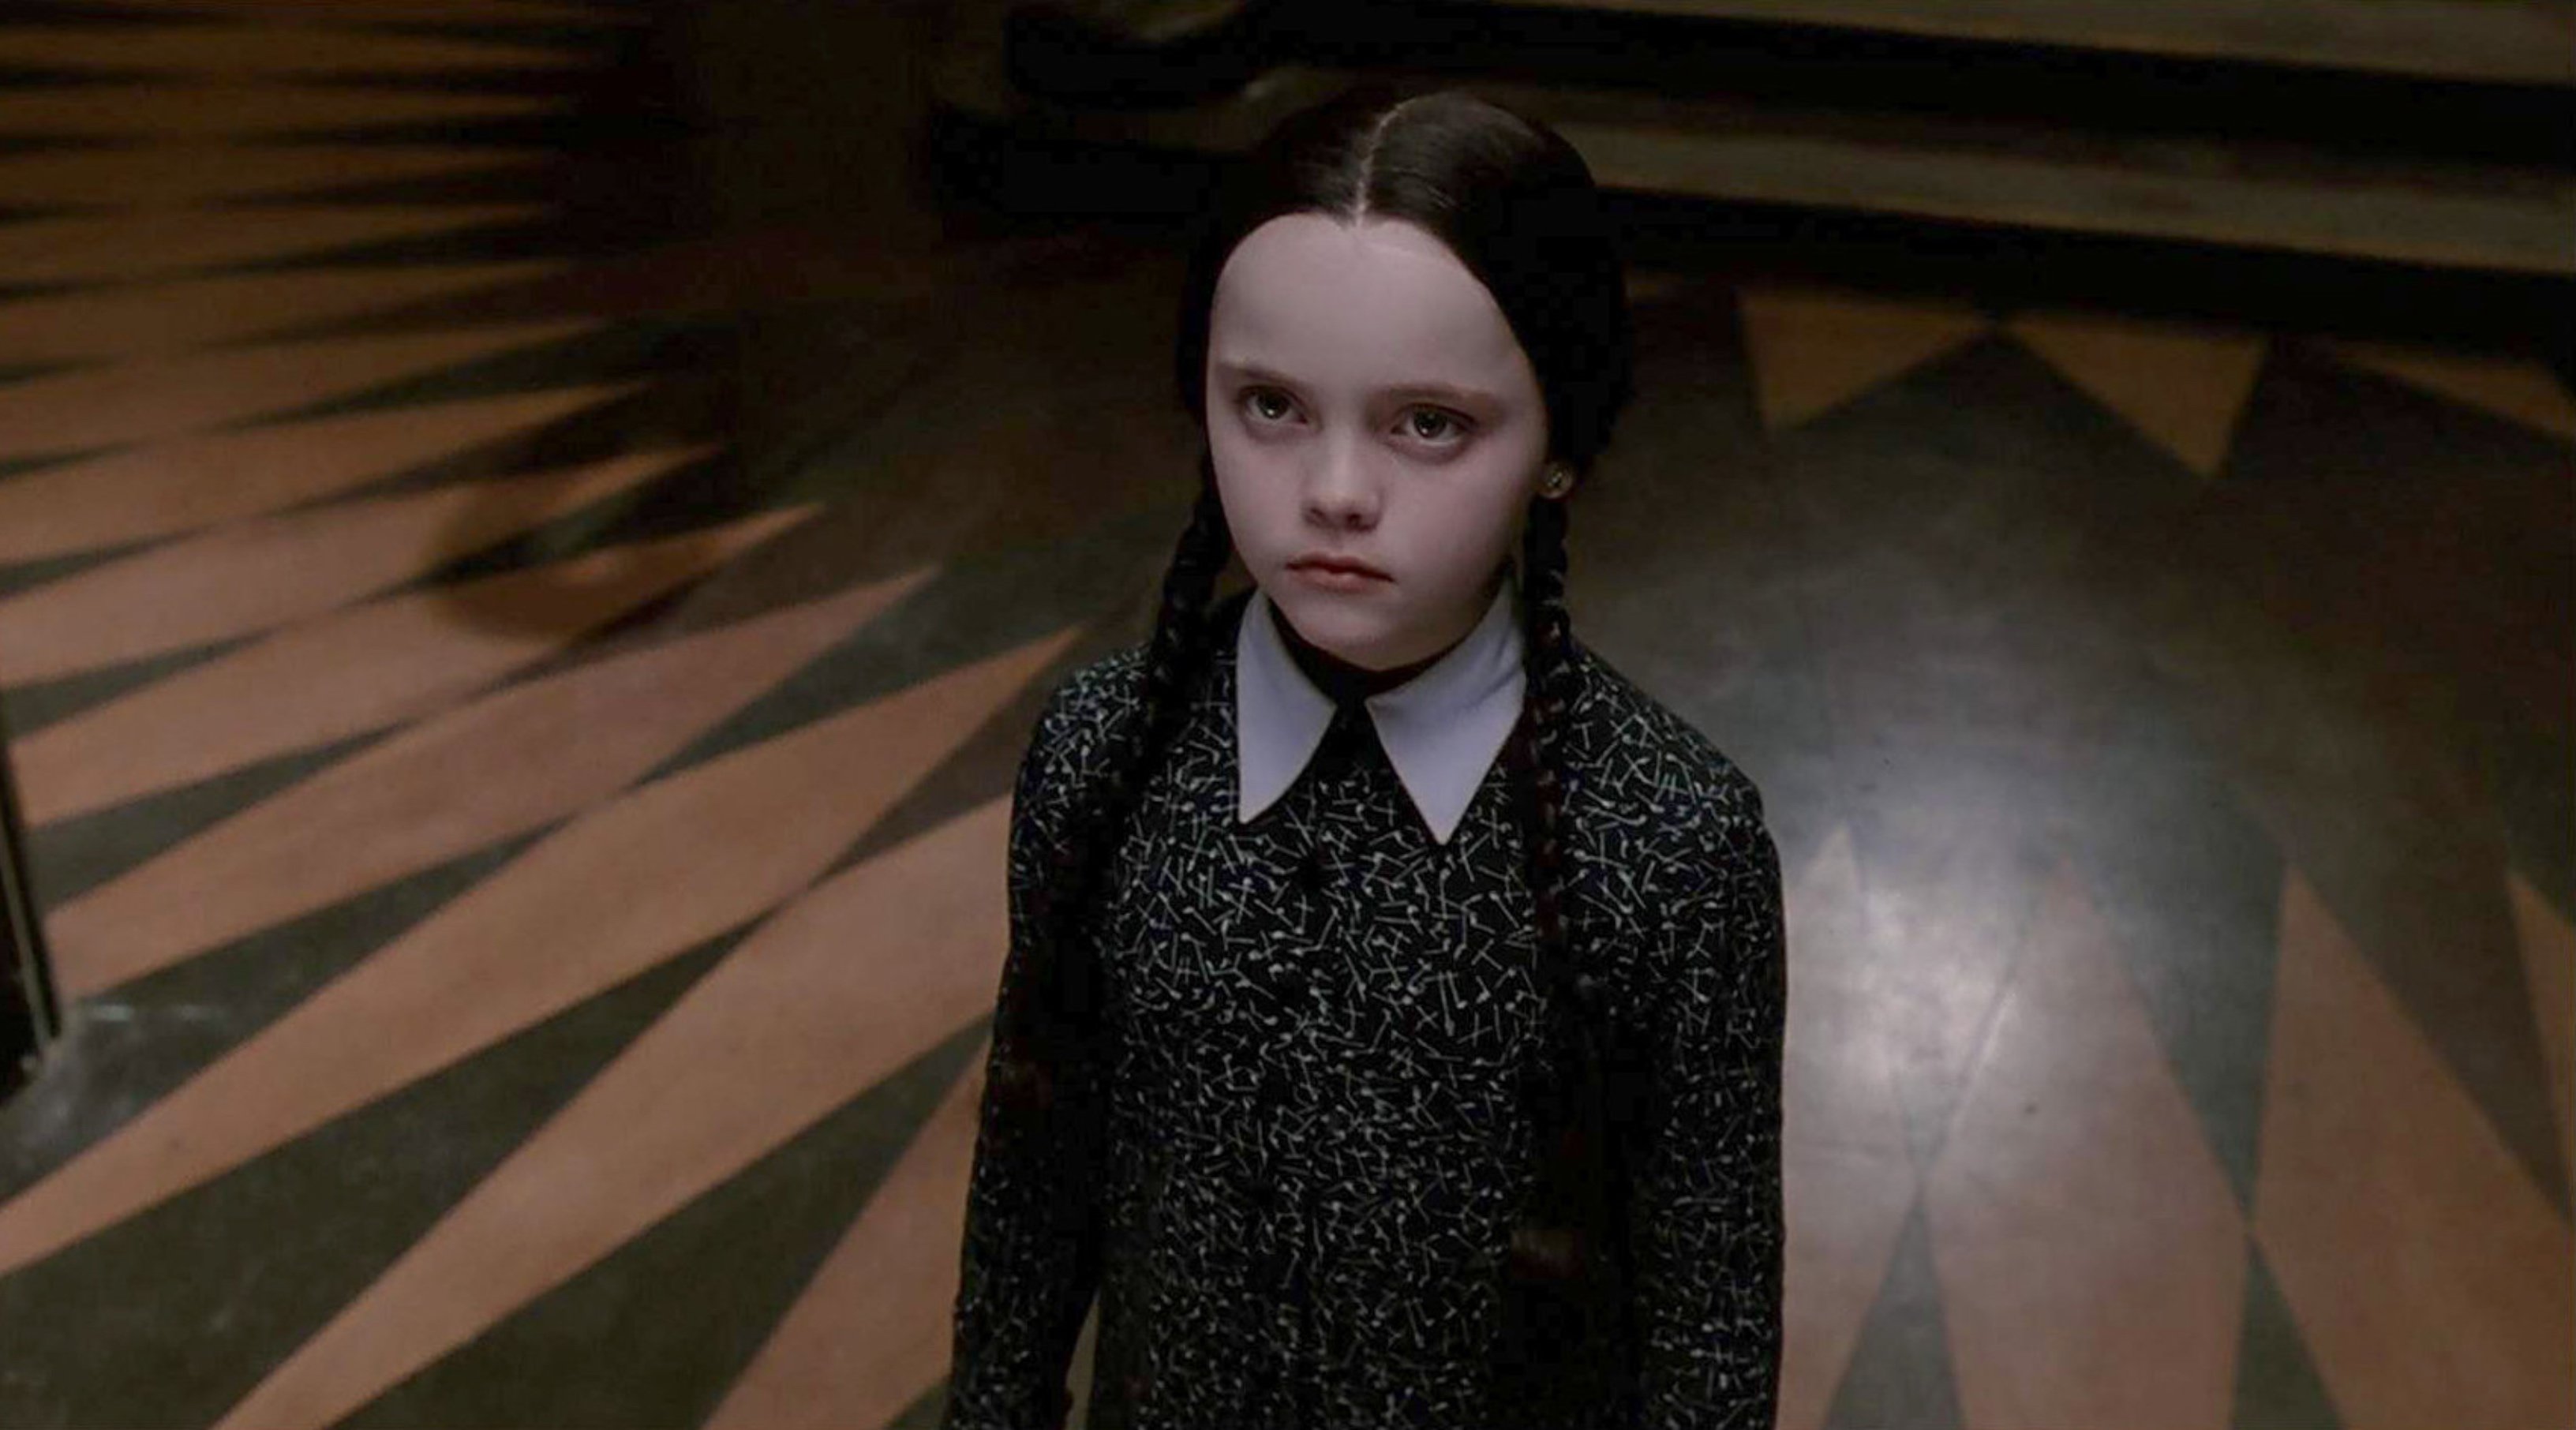 Every Actor Who Has Played Wednesday Addams Ahead of Tim Burton's 'Wednesday' Series